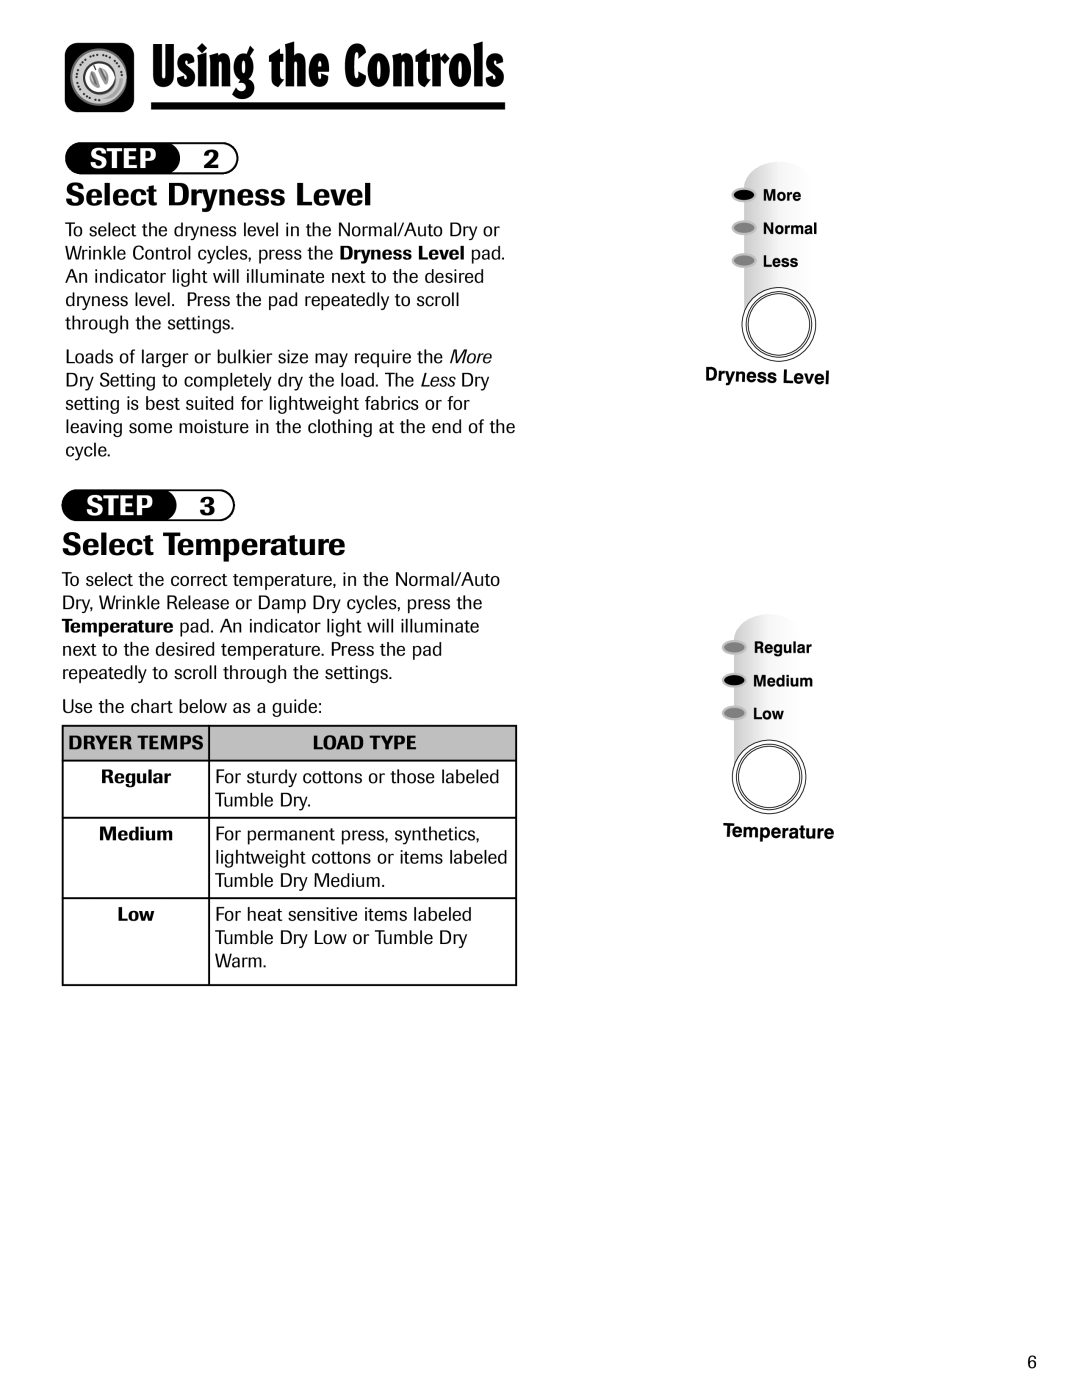 Maytag MD-24 Using the Controls, Select Dryness Level, Select Temperature, Use the chart below as a guide 